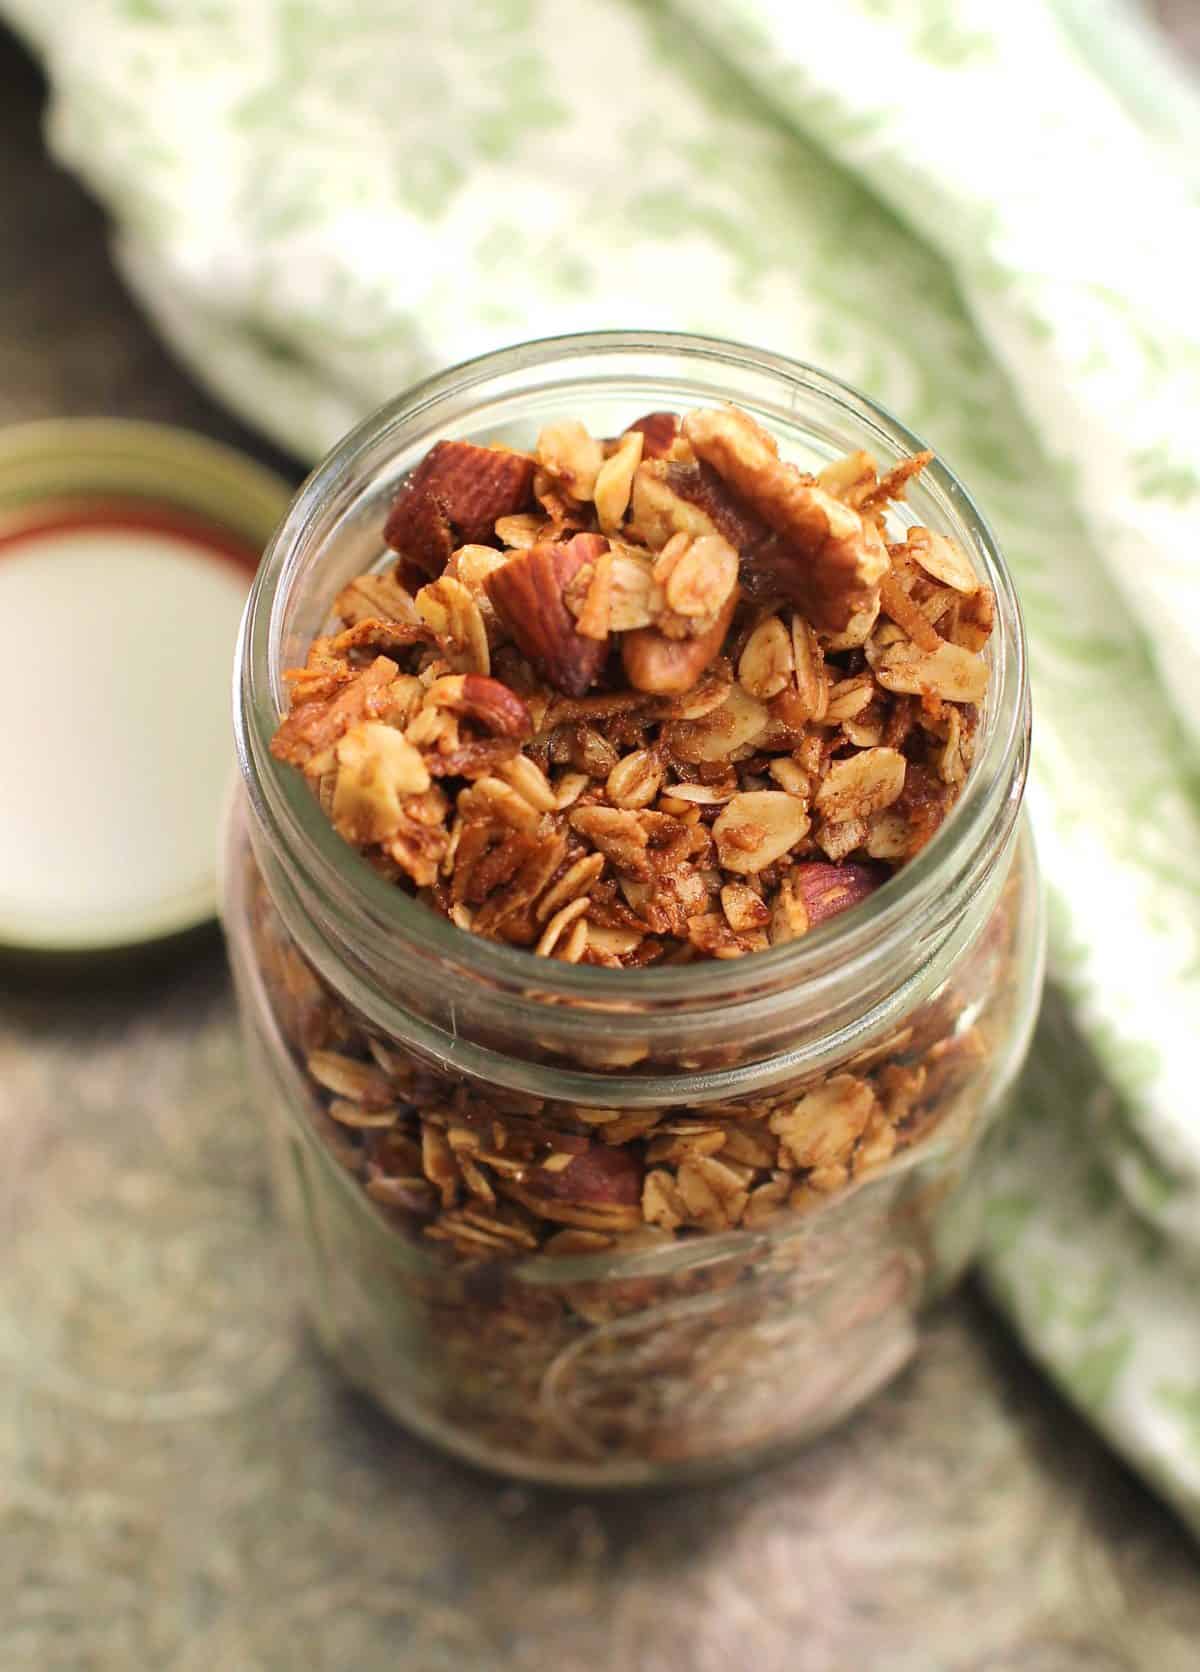 Indulge in homemade Small Batch Butter Pecan Granola! This recipe delivers crunchy, buttery, and nutty goodness that's perfect as a snack or versatile topping.